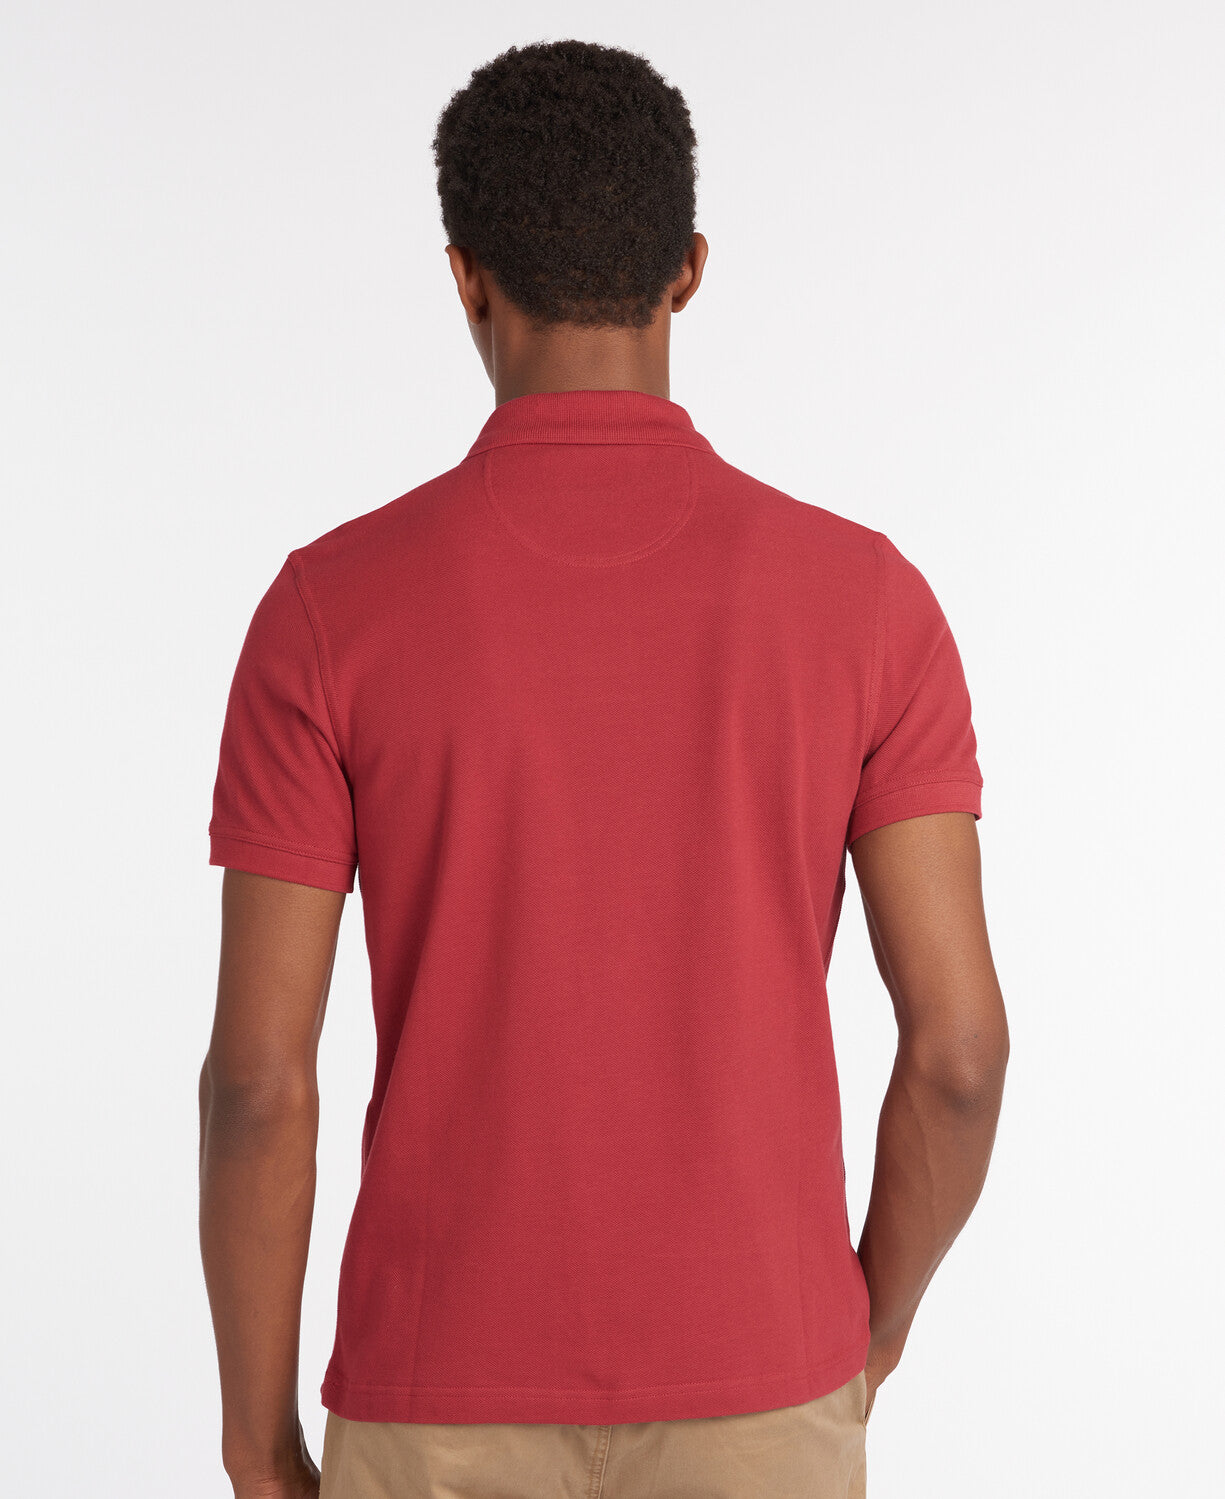 Barbour Sports Polo - Biking Red